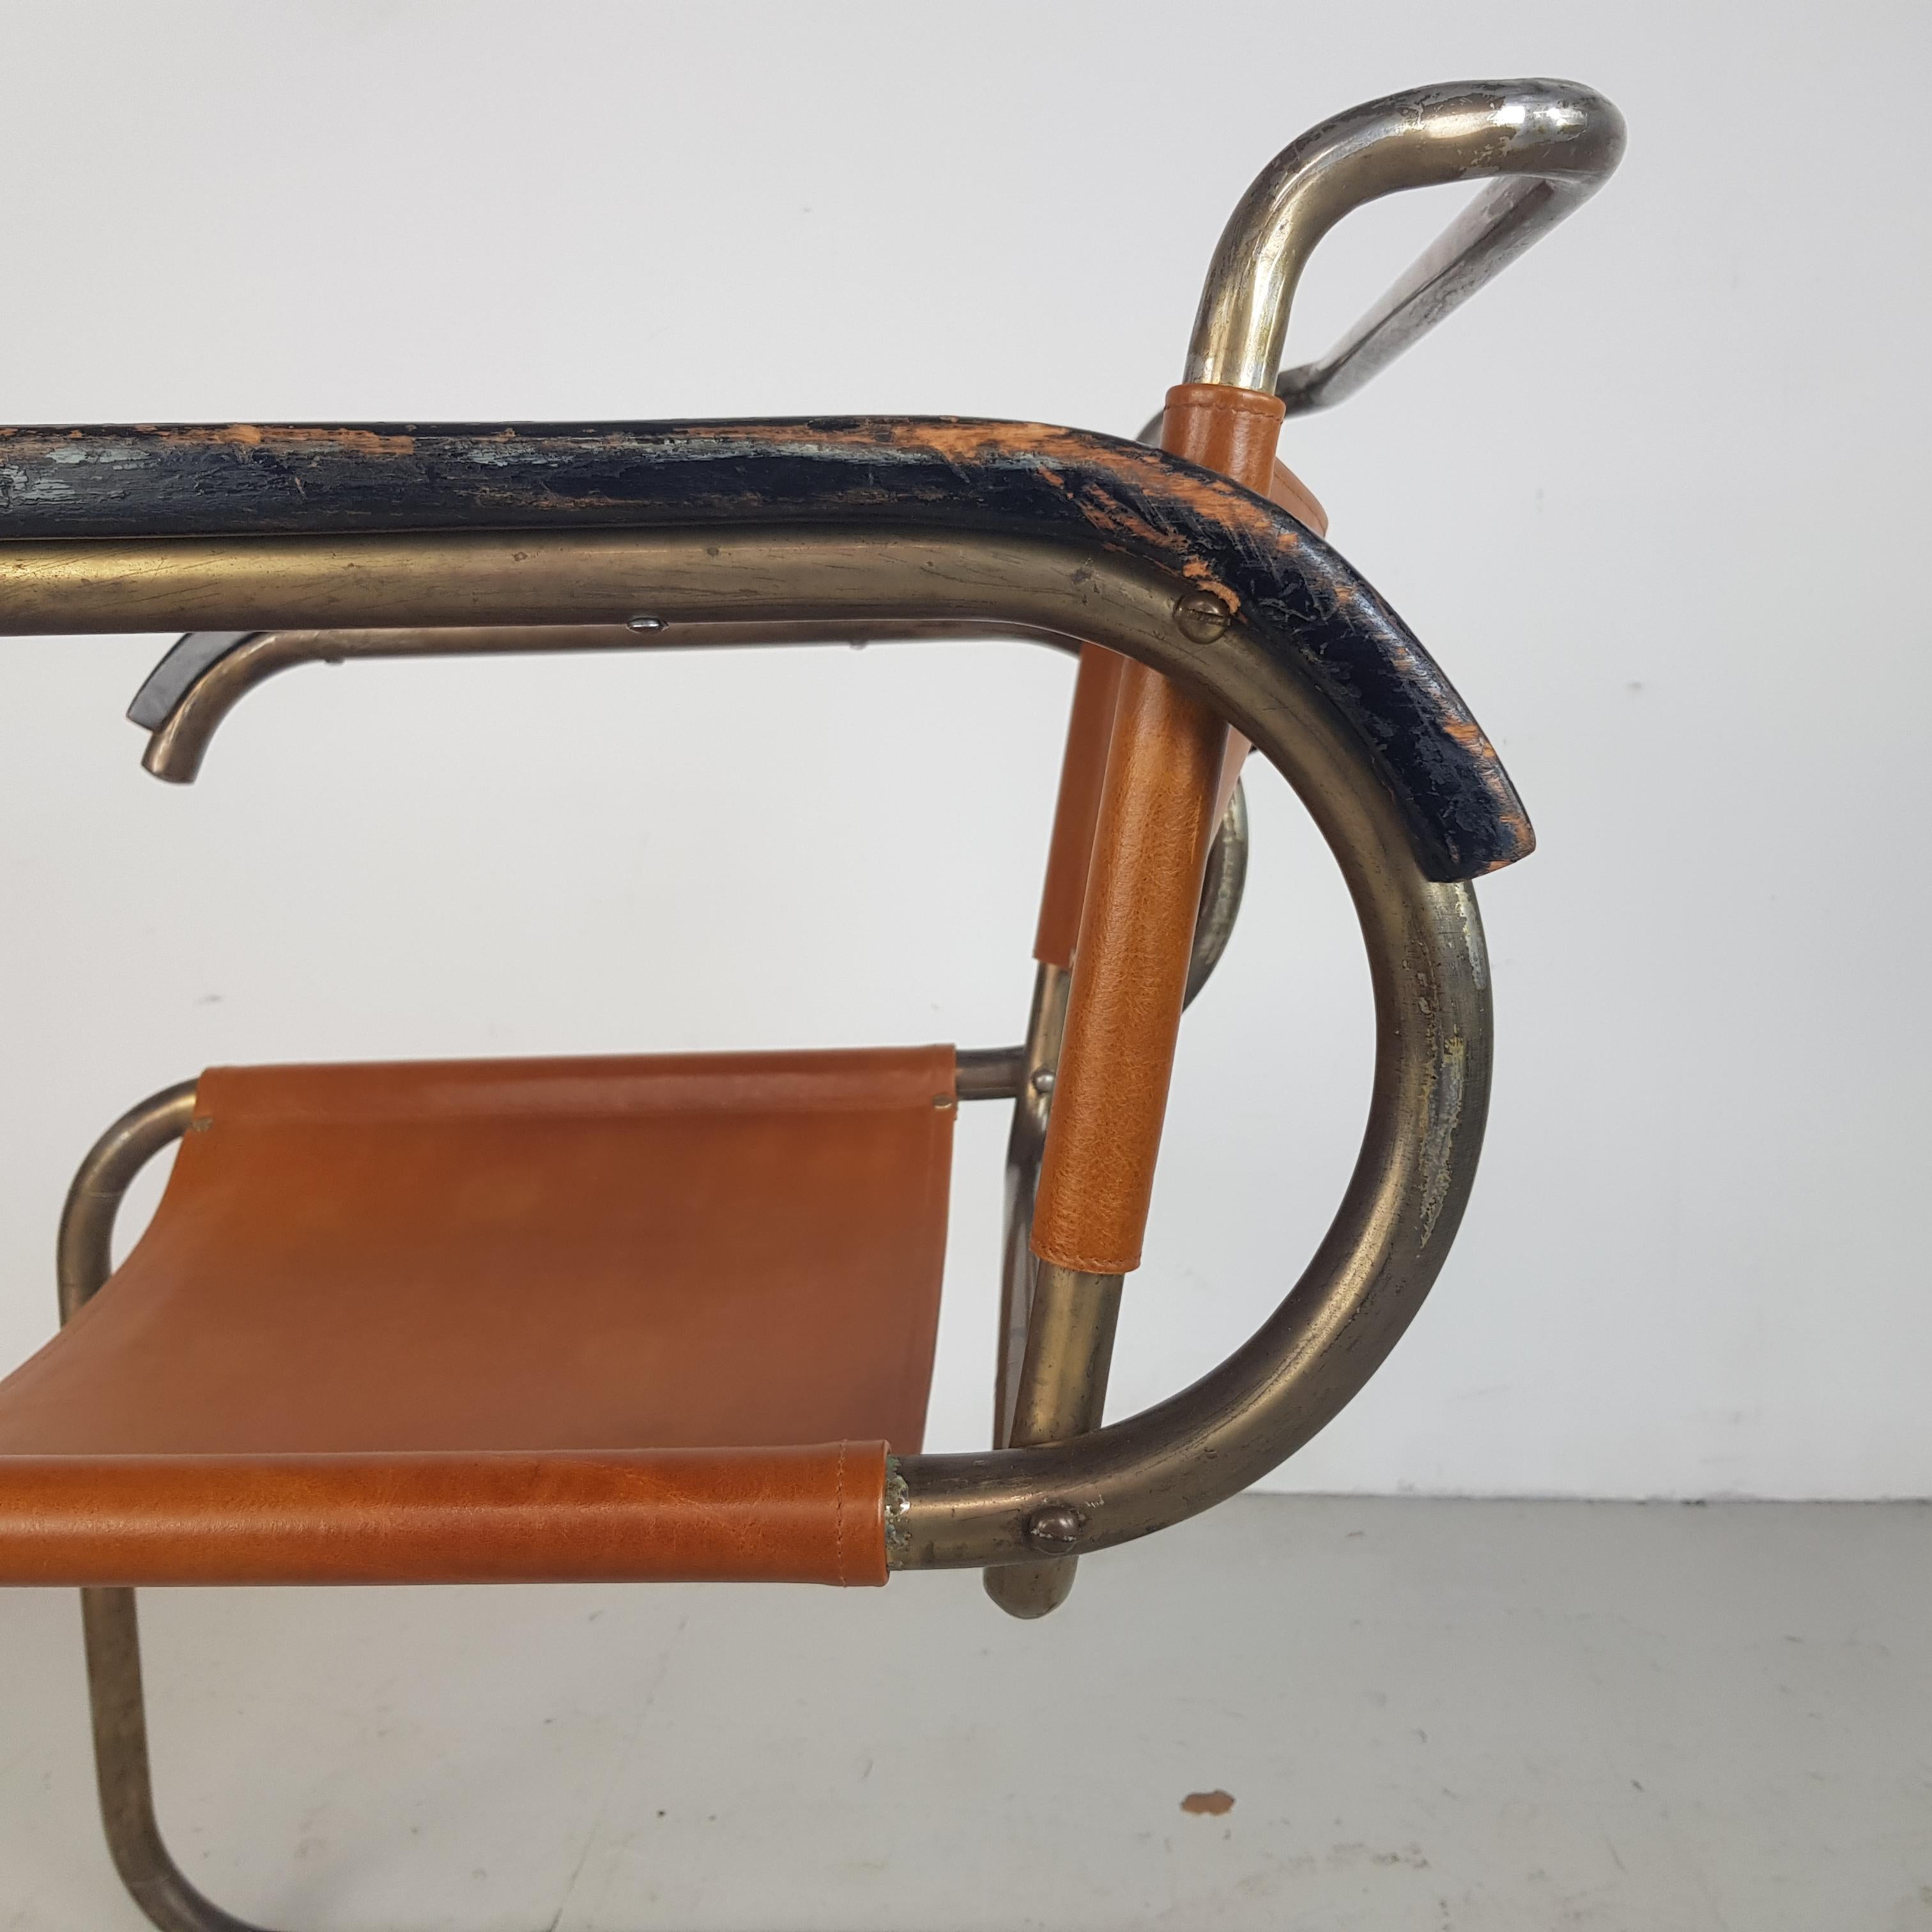 Hungarian Original 1929 Marcel Breuer B46 Variant Armchair by Thonet Sidam For Sale